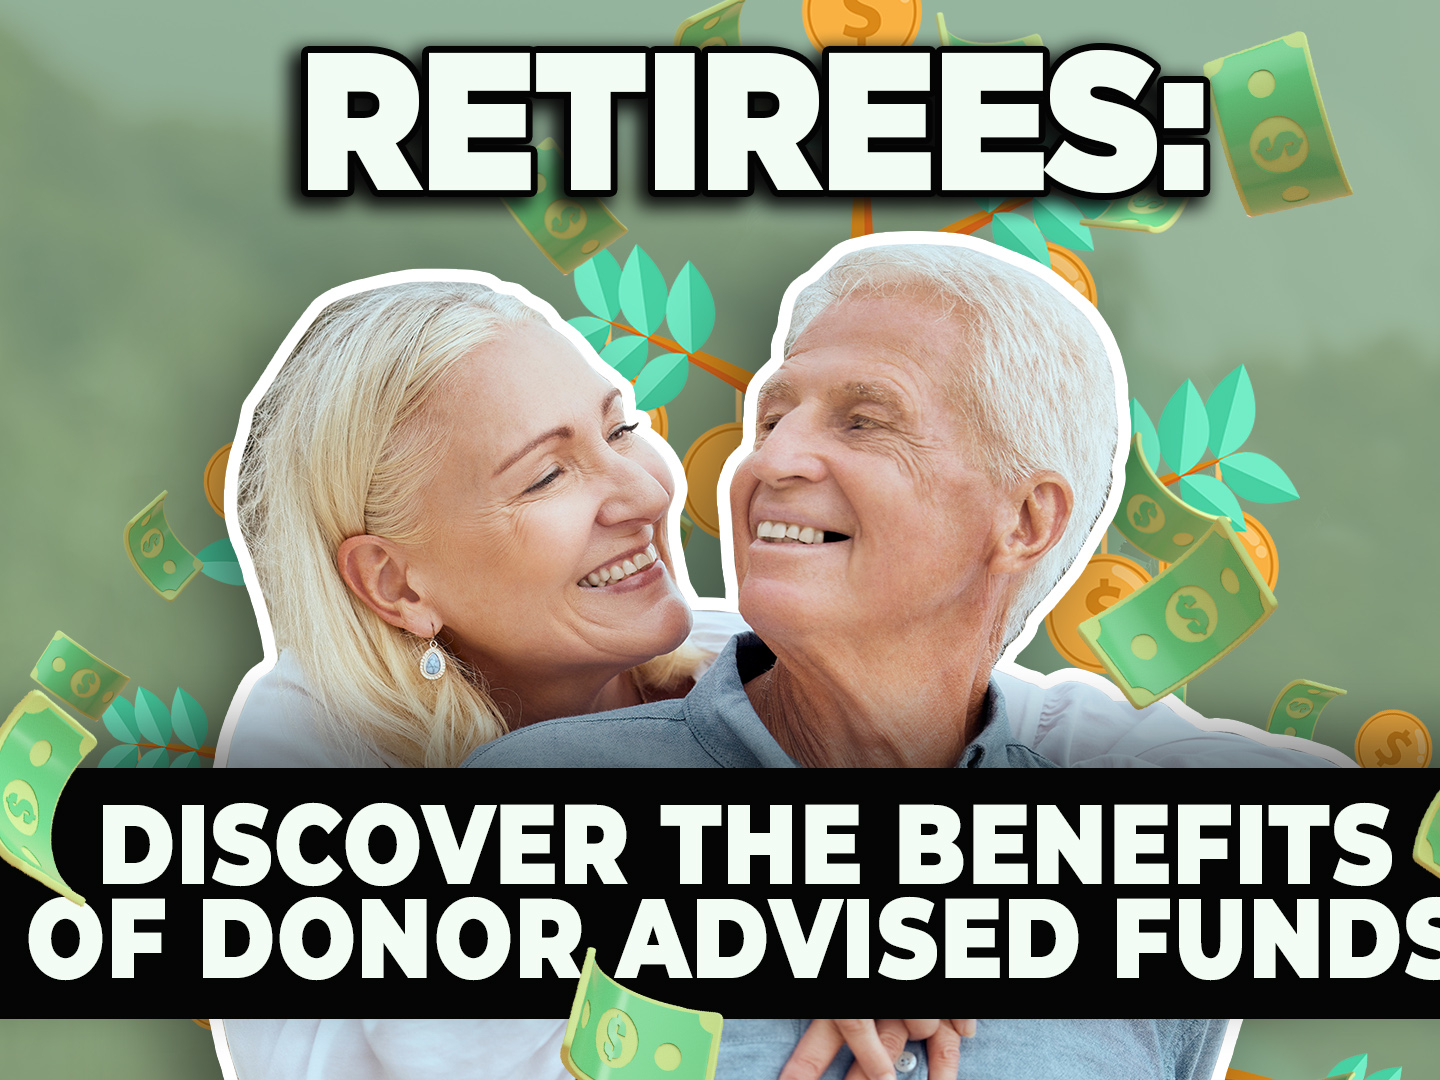 Retirees and Donor Advised Funds